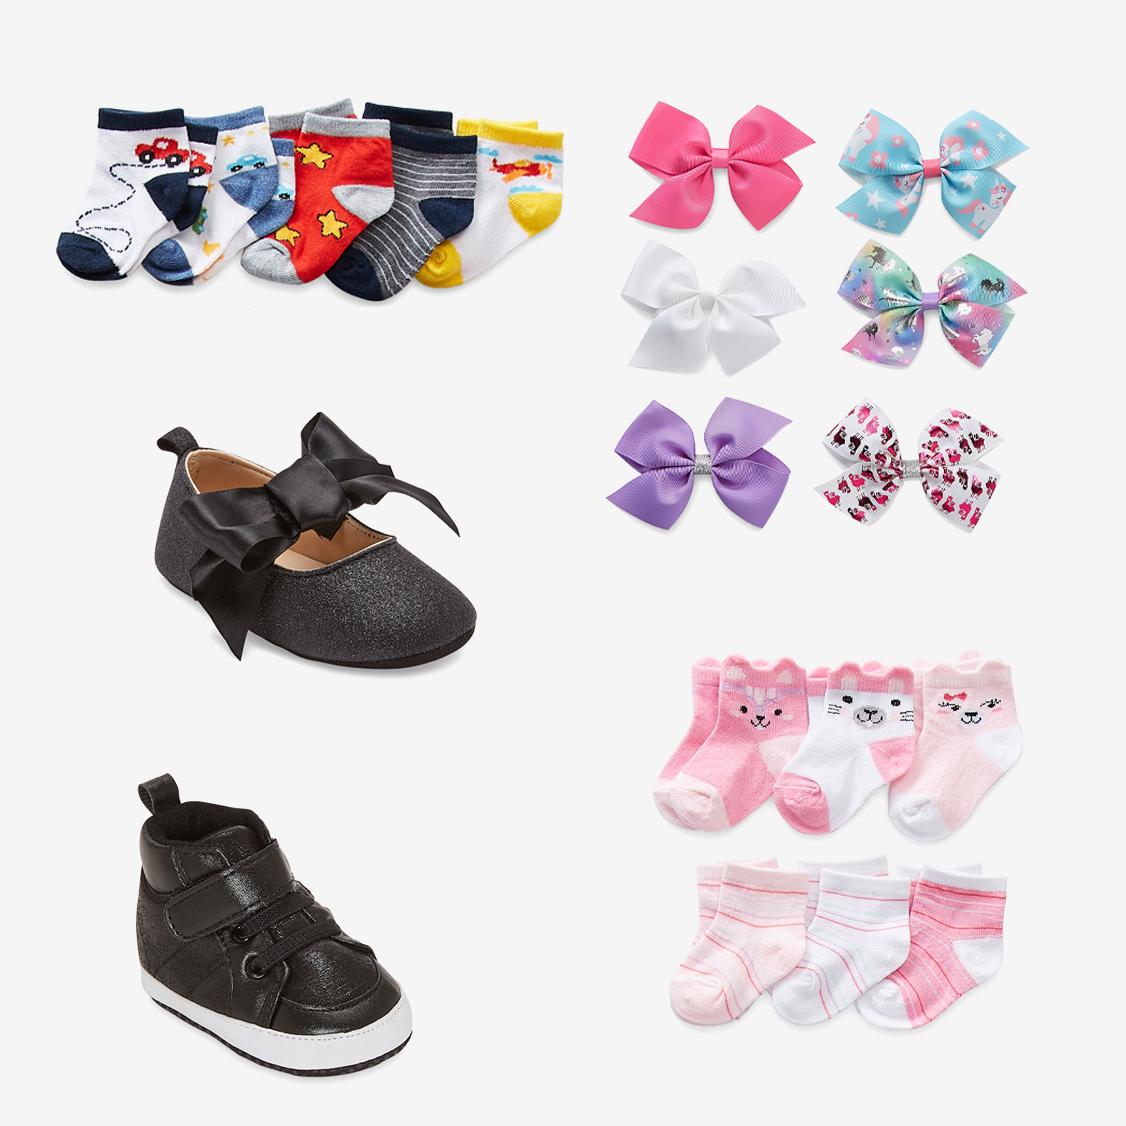 DIV03_NUC_BABY SHOES & ACCESSORIES